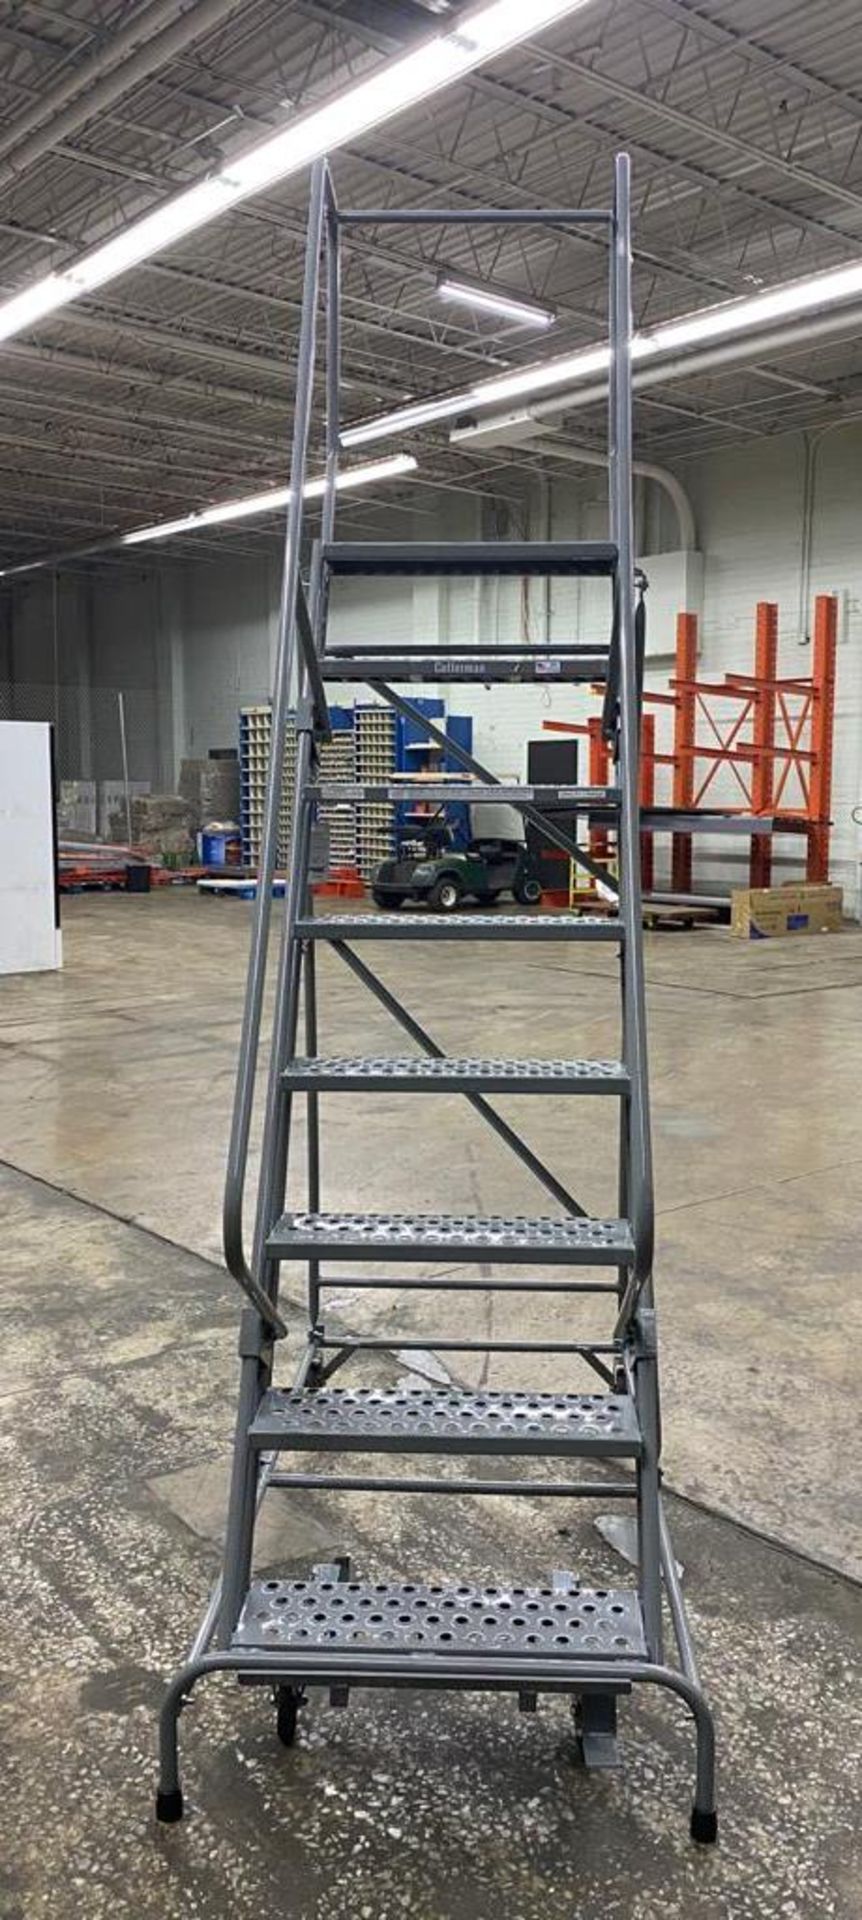 NEW 10 STEP ROLLING LADDER - Image 4 of 4